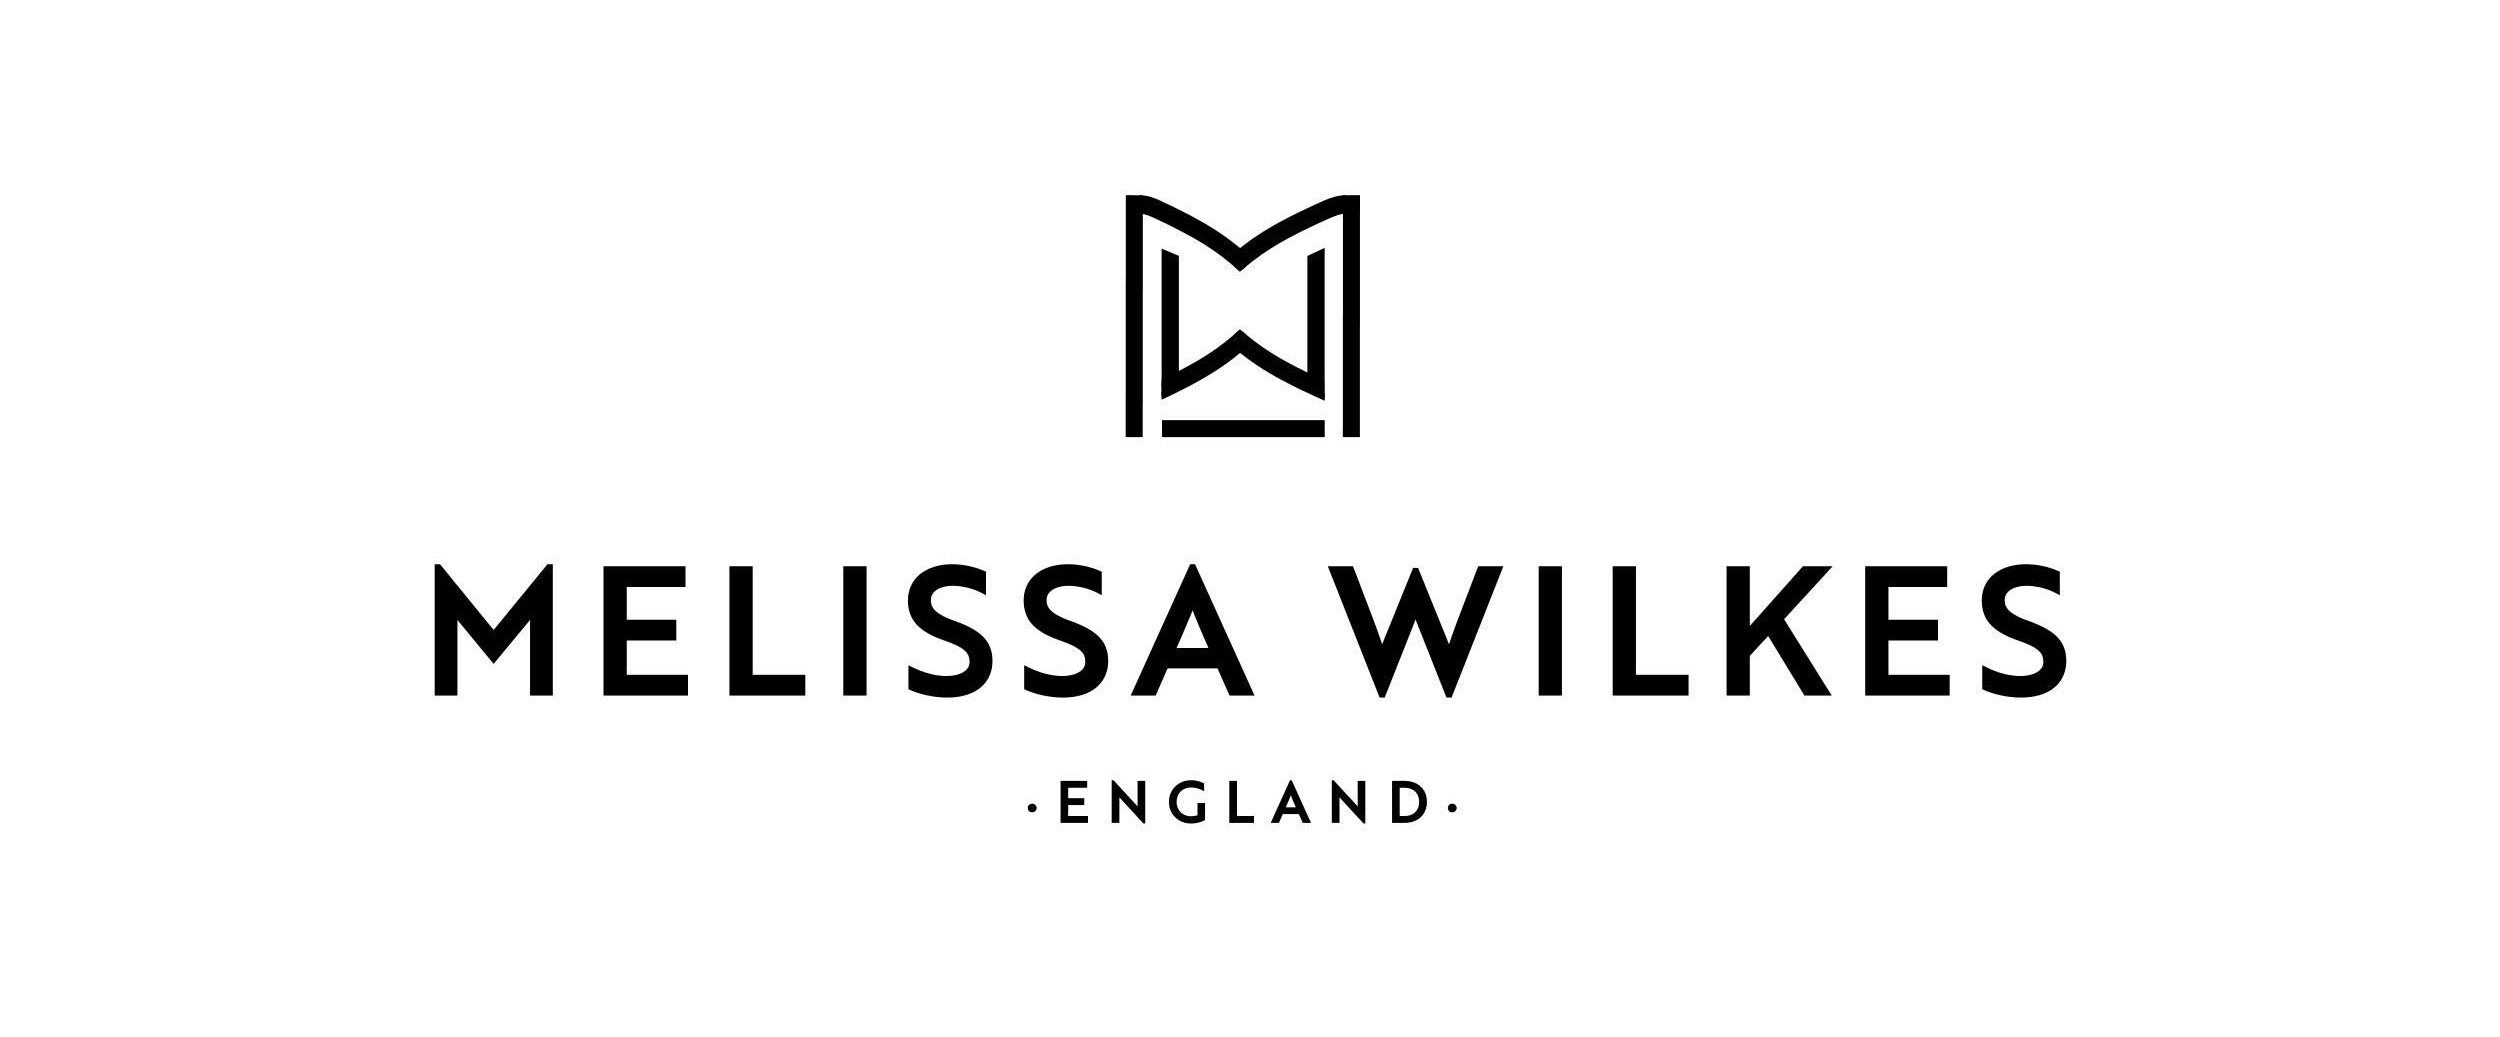 Black and white company logo for Melissa Wilkes.